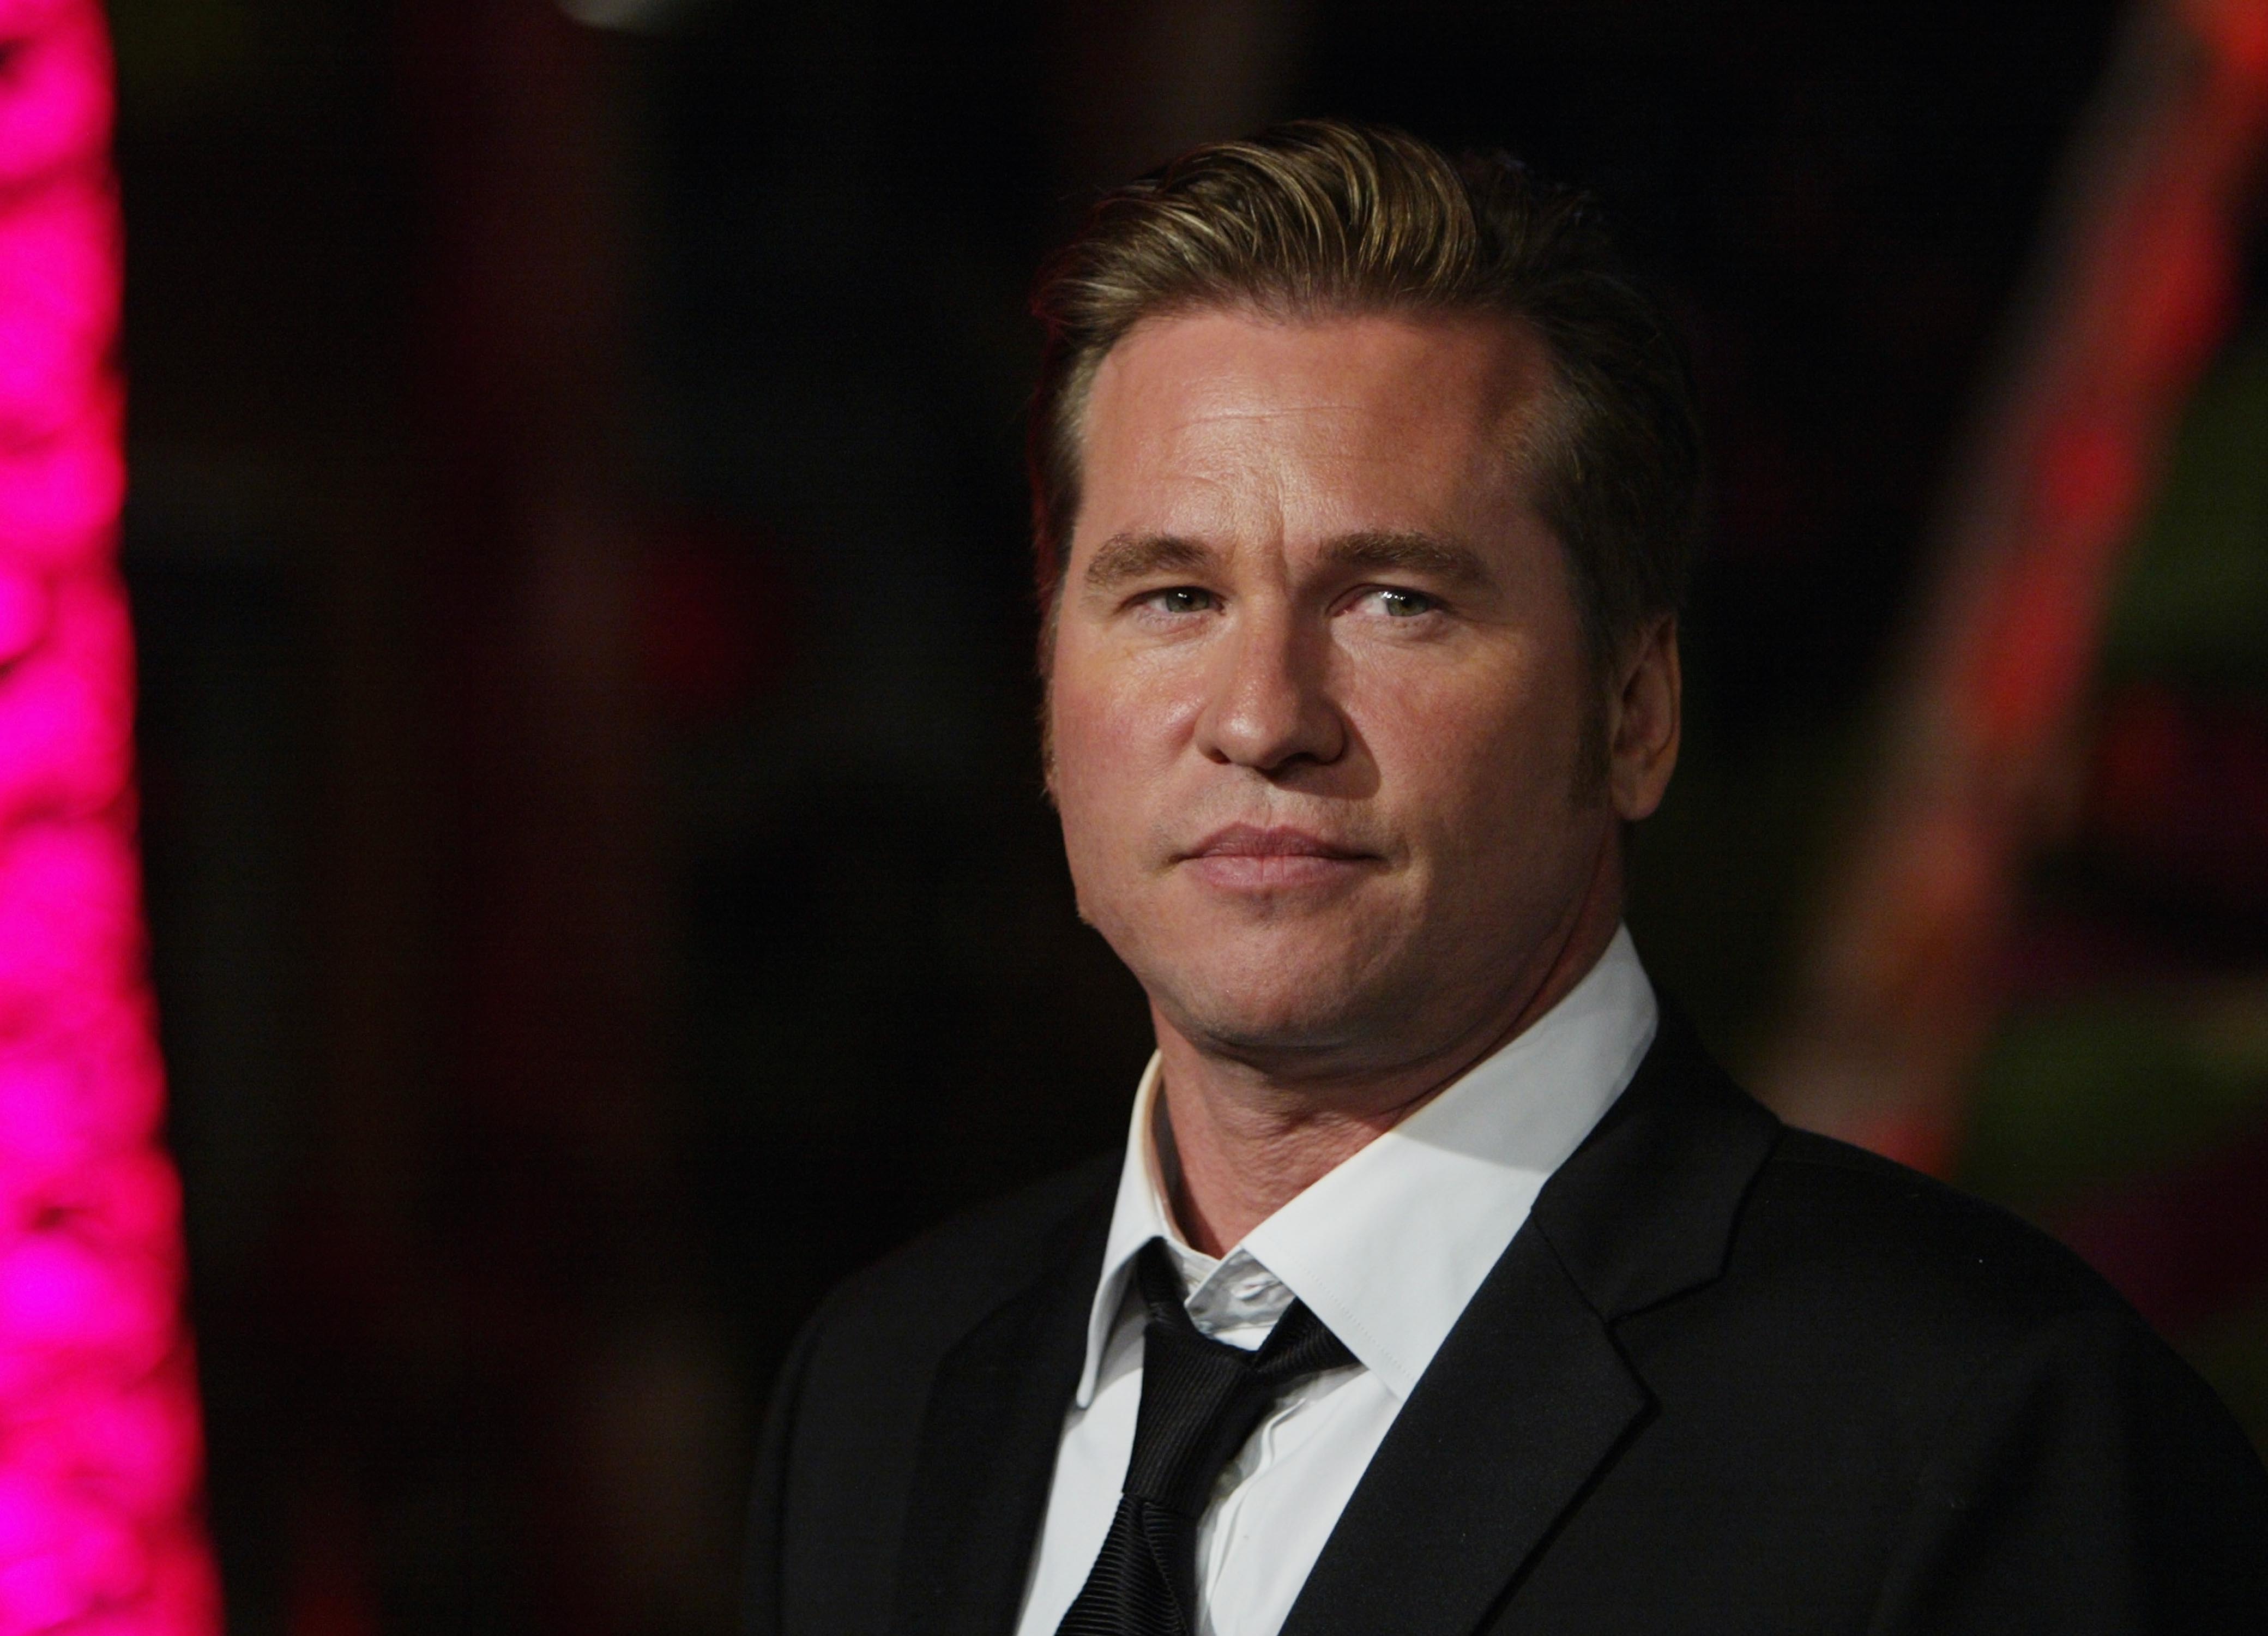 Actor Val Kilmer attends the 2004 Vanity Fair Oscars event in California. | Photo: Getty Images